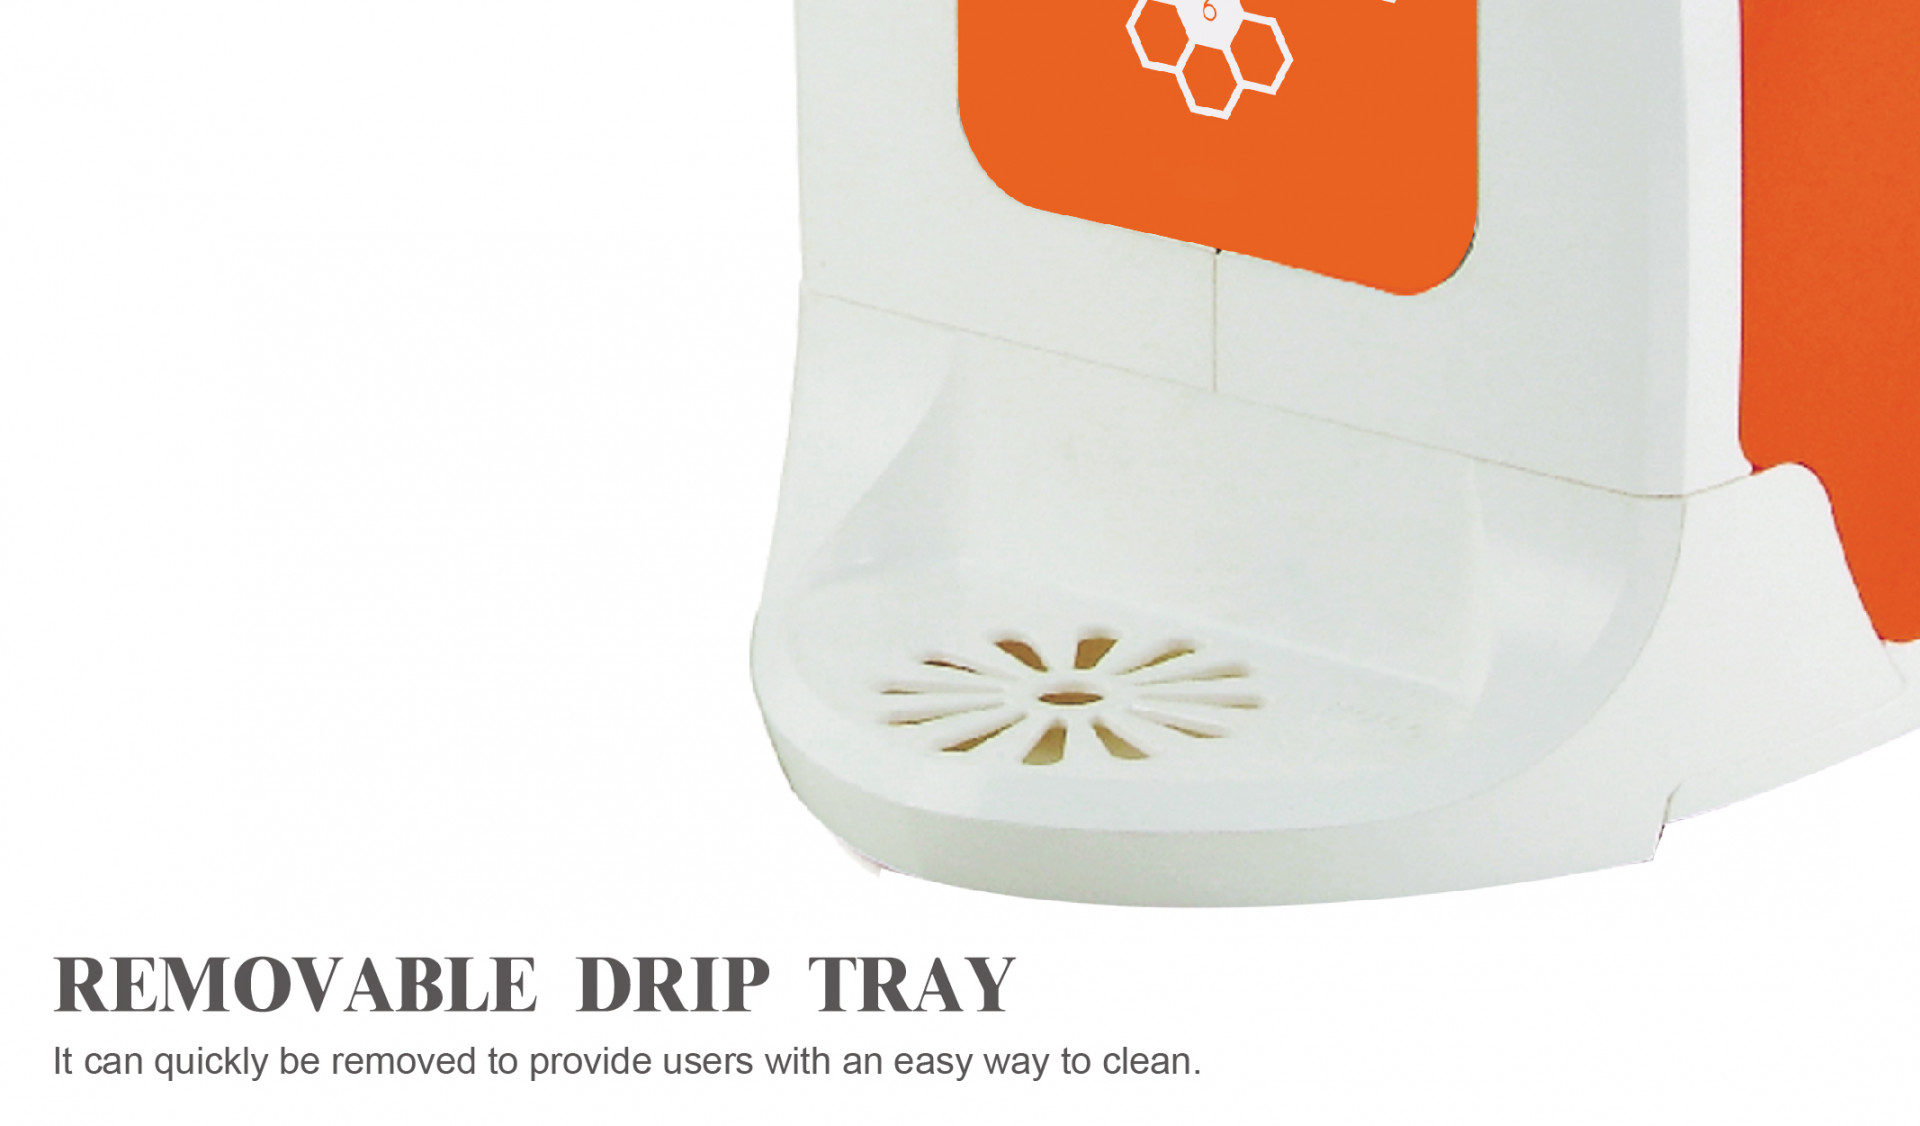 RO SYSTEM REMOVABLE DRIP TRAY